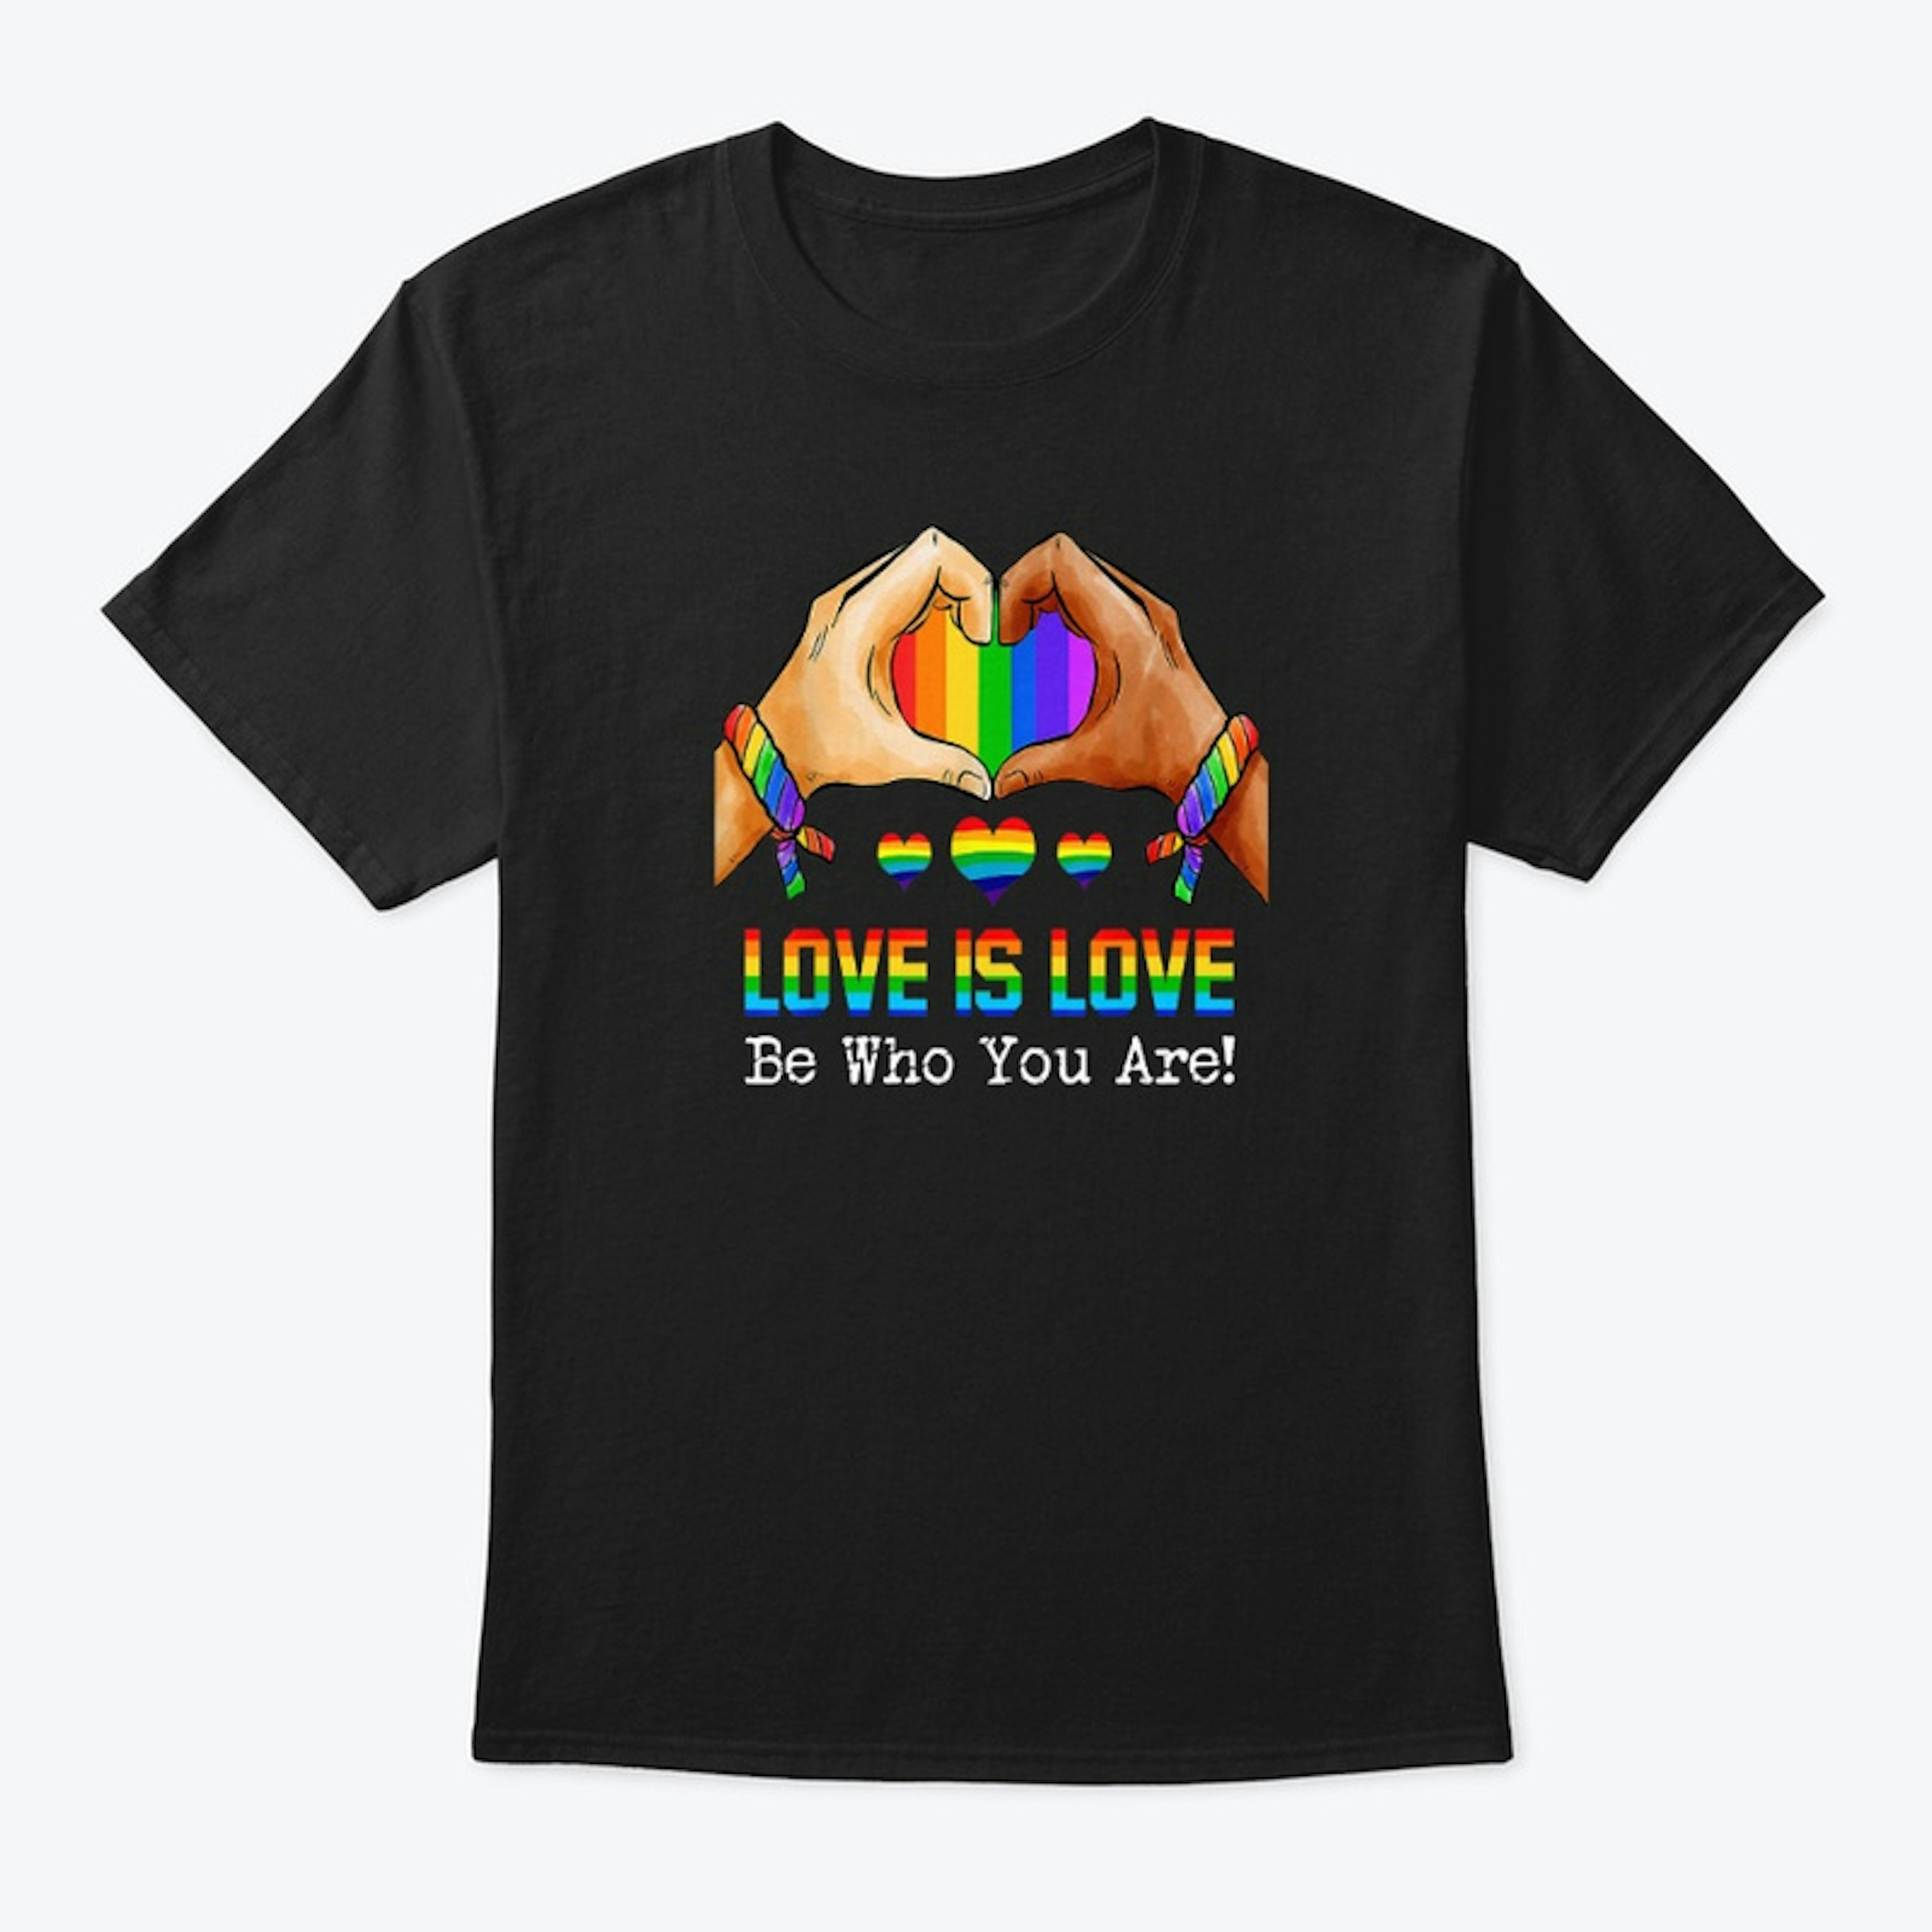 Love Is Love - Be Who You Are